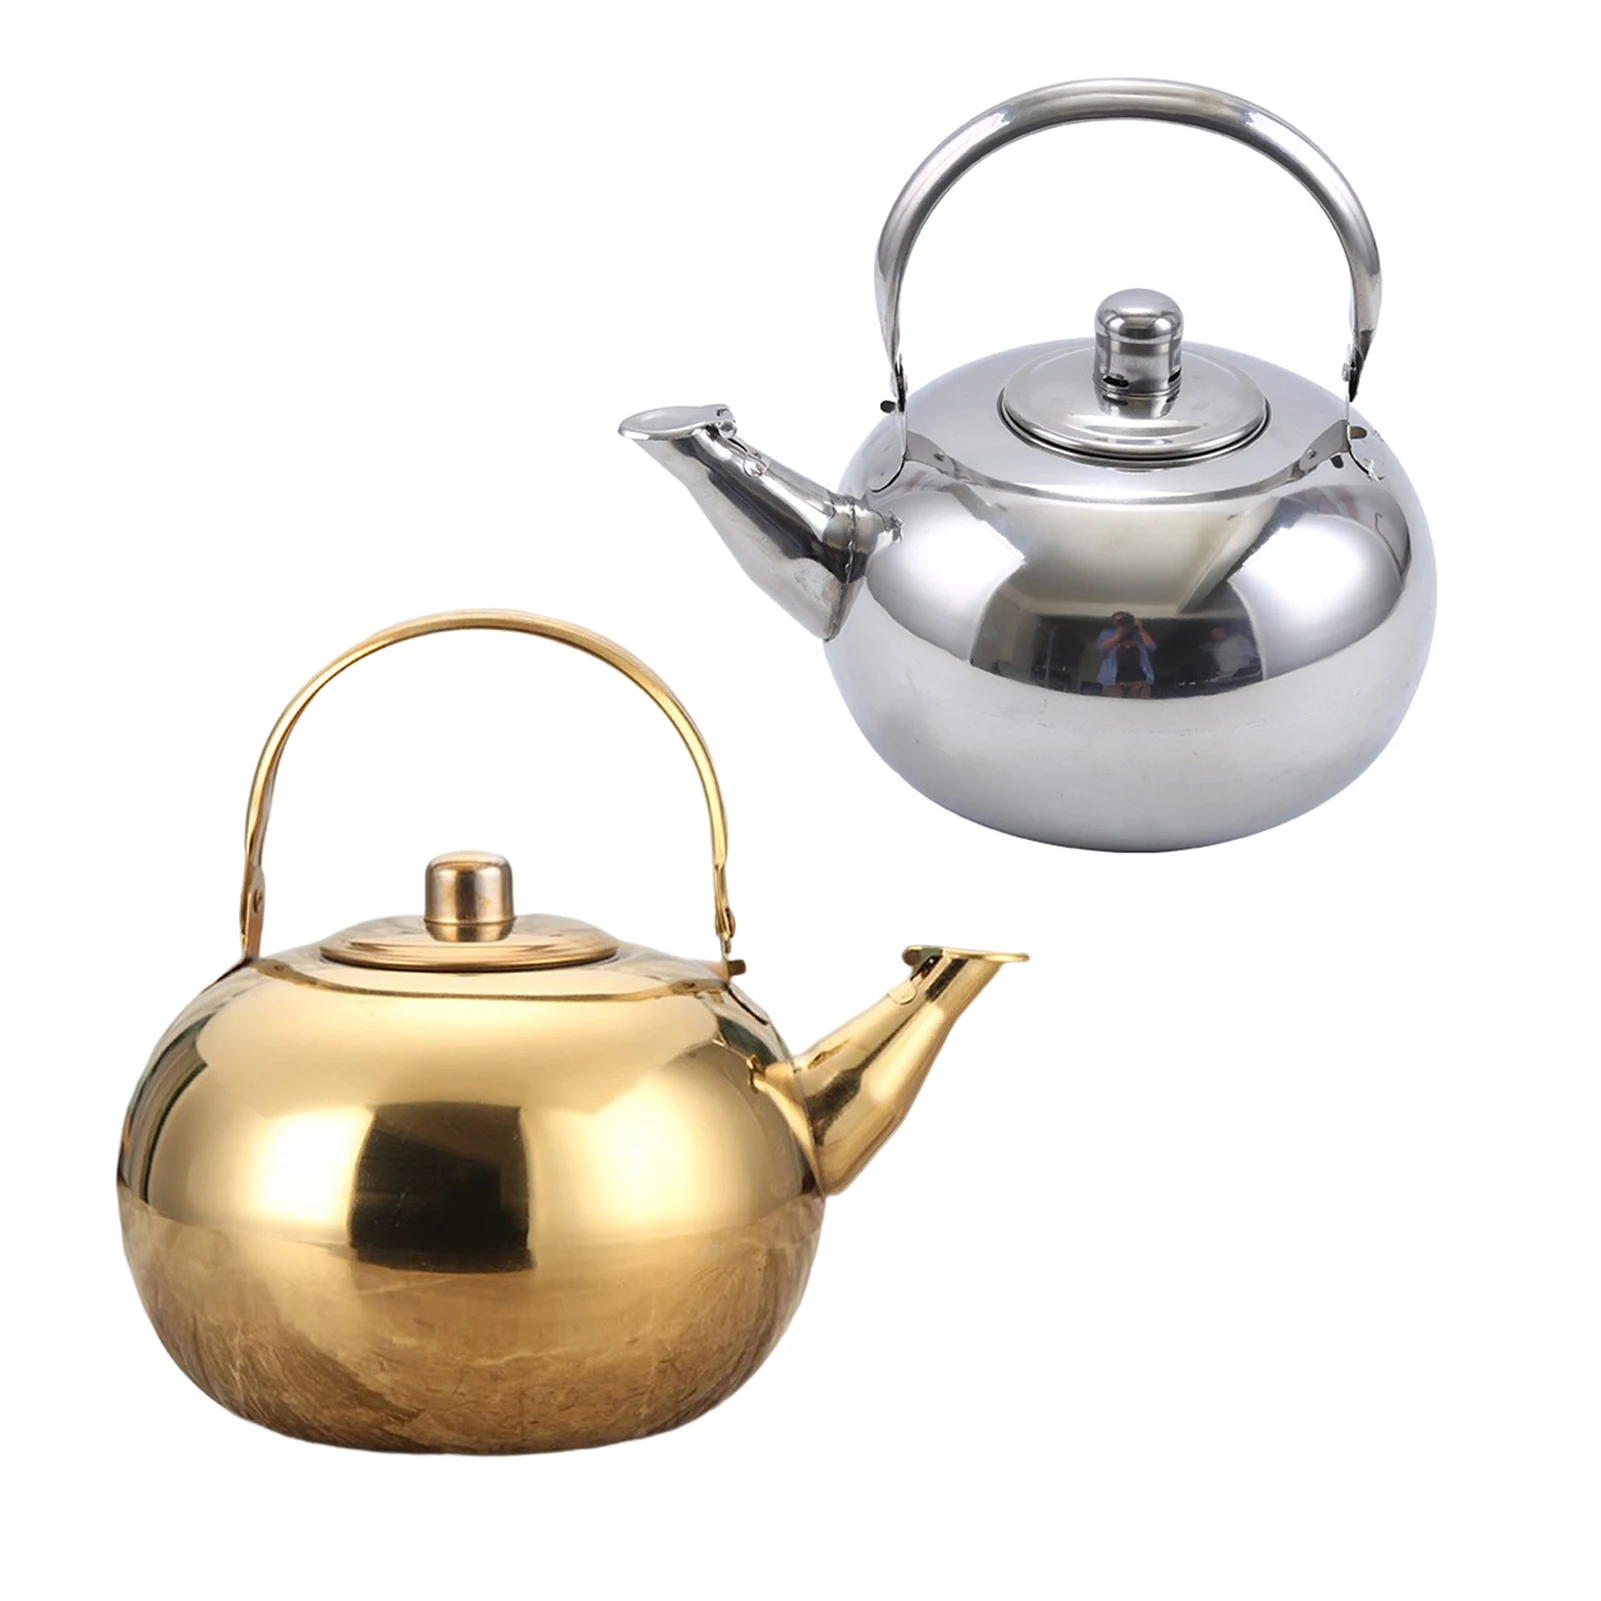 https://ae01.alicdn.com/kf/S2995fae652c74e5291352f889971ffa0y/Fast-Boil-Stainless-Steel-Stovetop-Indoor-Teapot-Food-Grade-Stainless-Steel-with-Dust-Nozzle-Cover-for.jpg